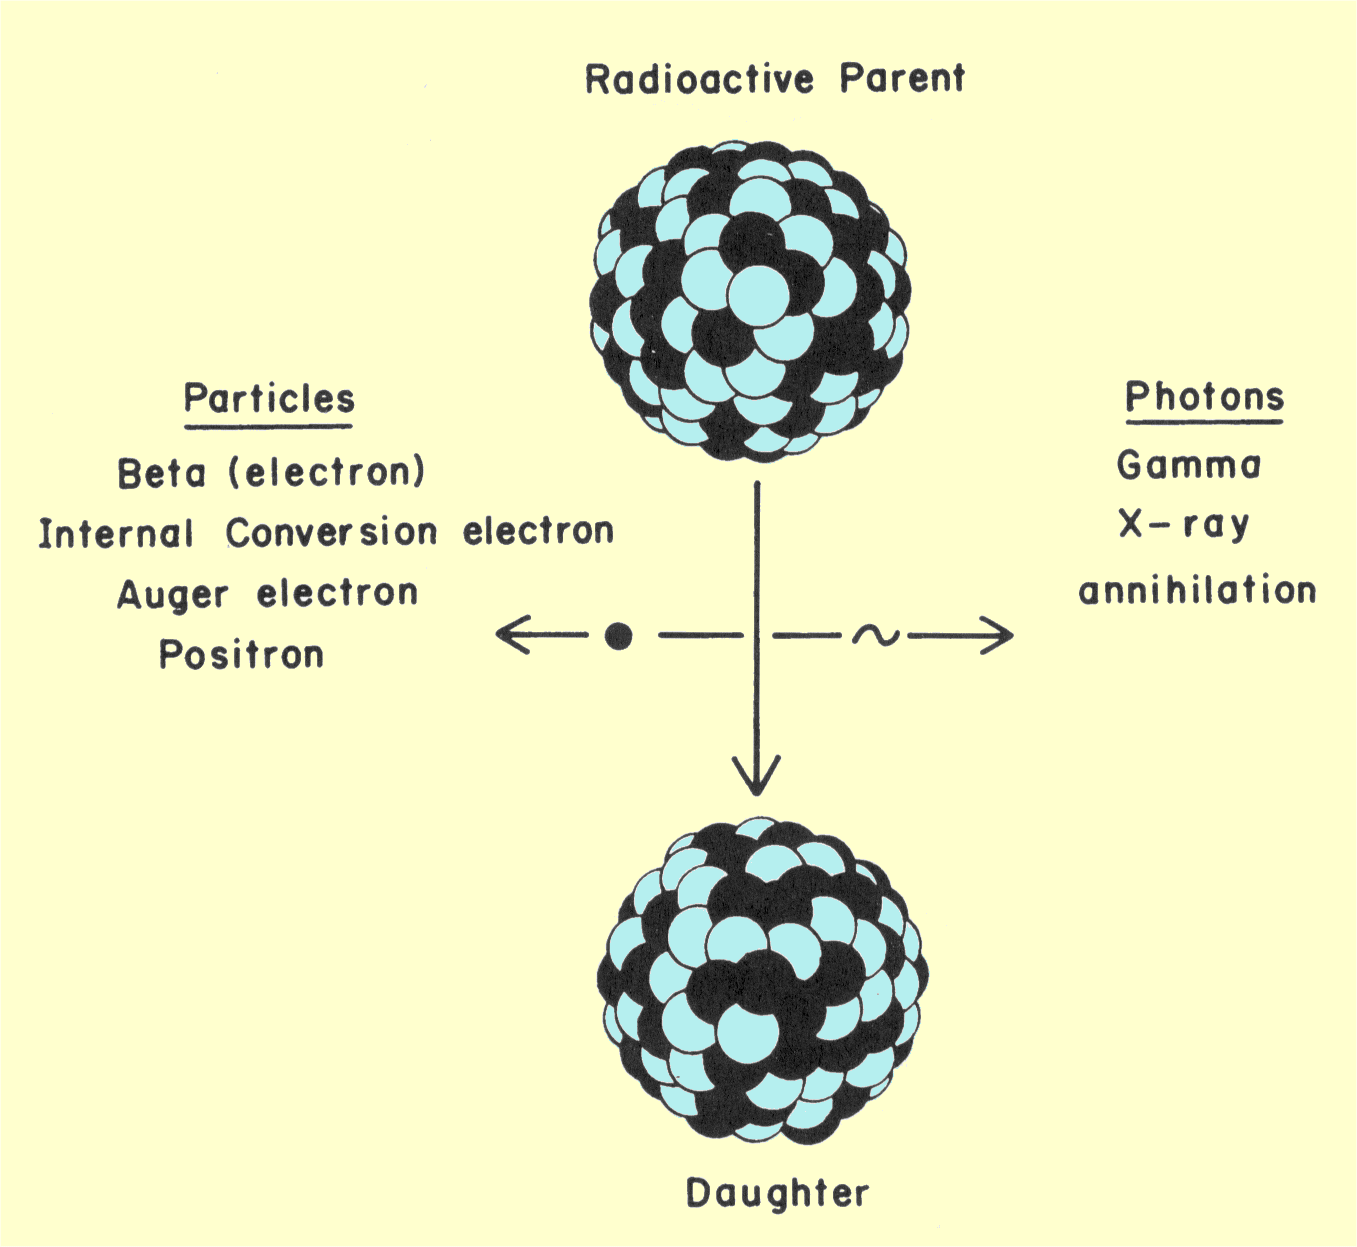 Various Radiations Produced by Radioactive Transitions